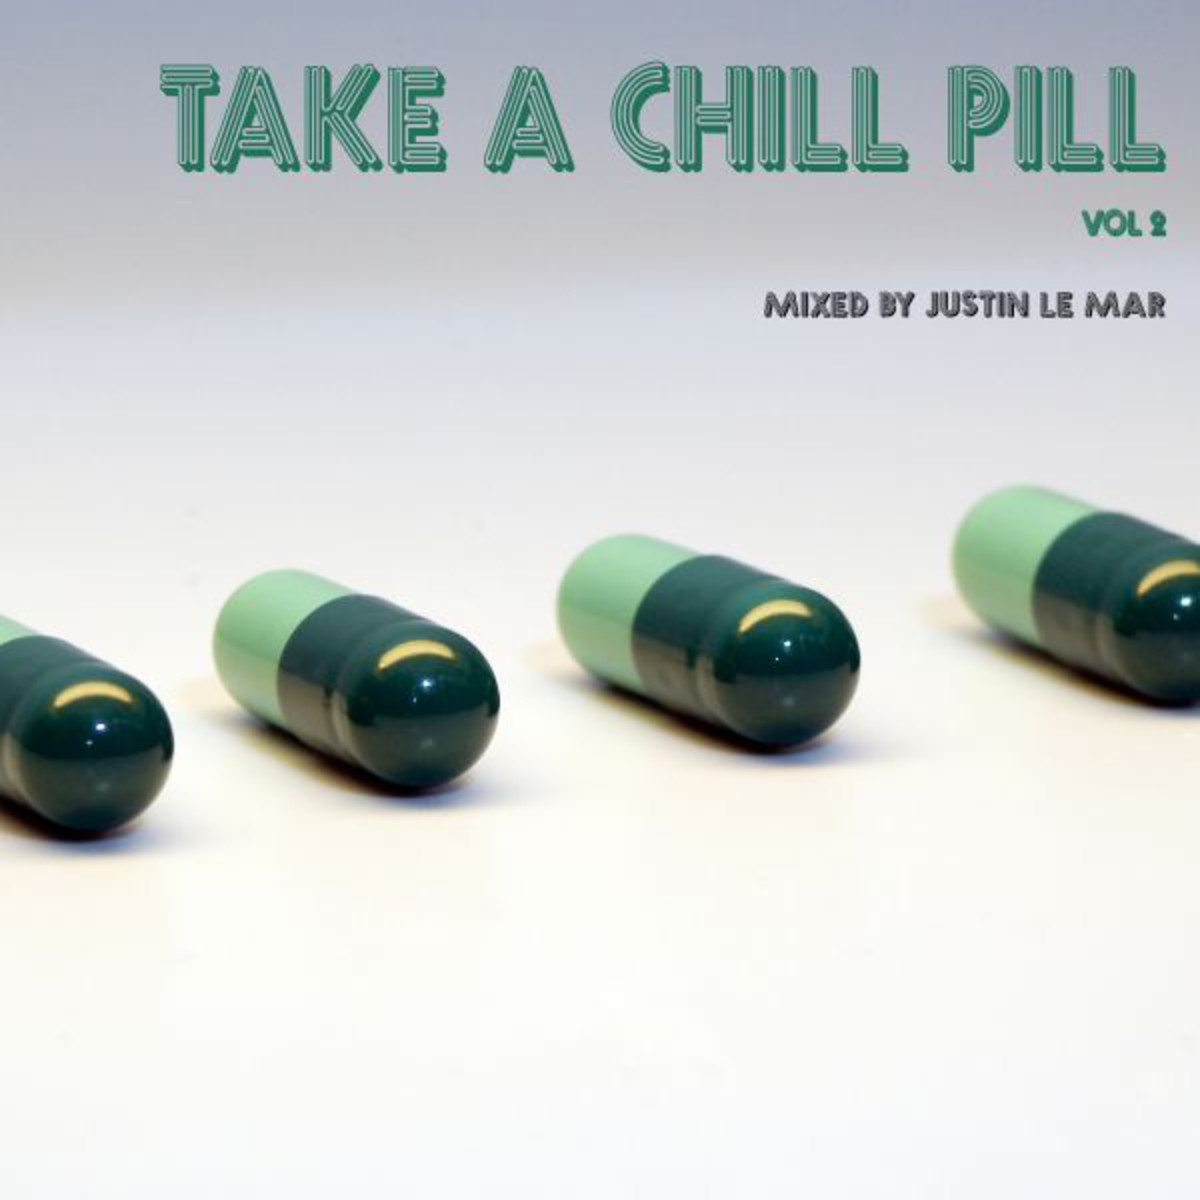 Take A Chill Pill Vol 2 - Mixed by Justin Le Mar